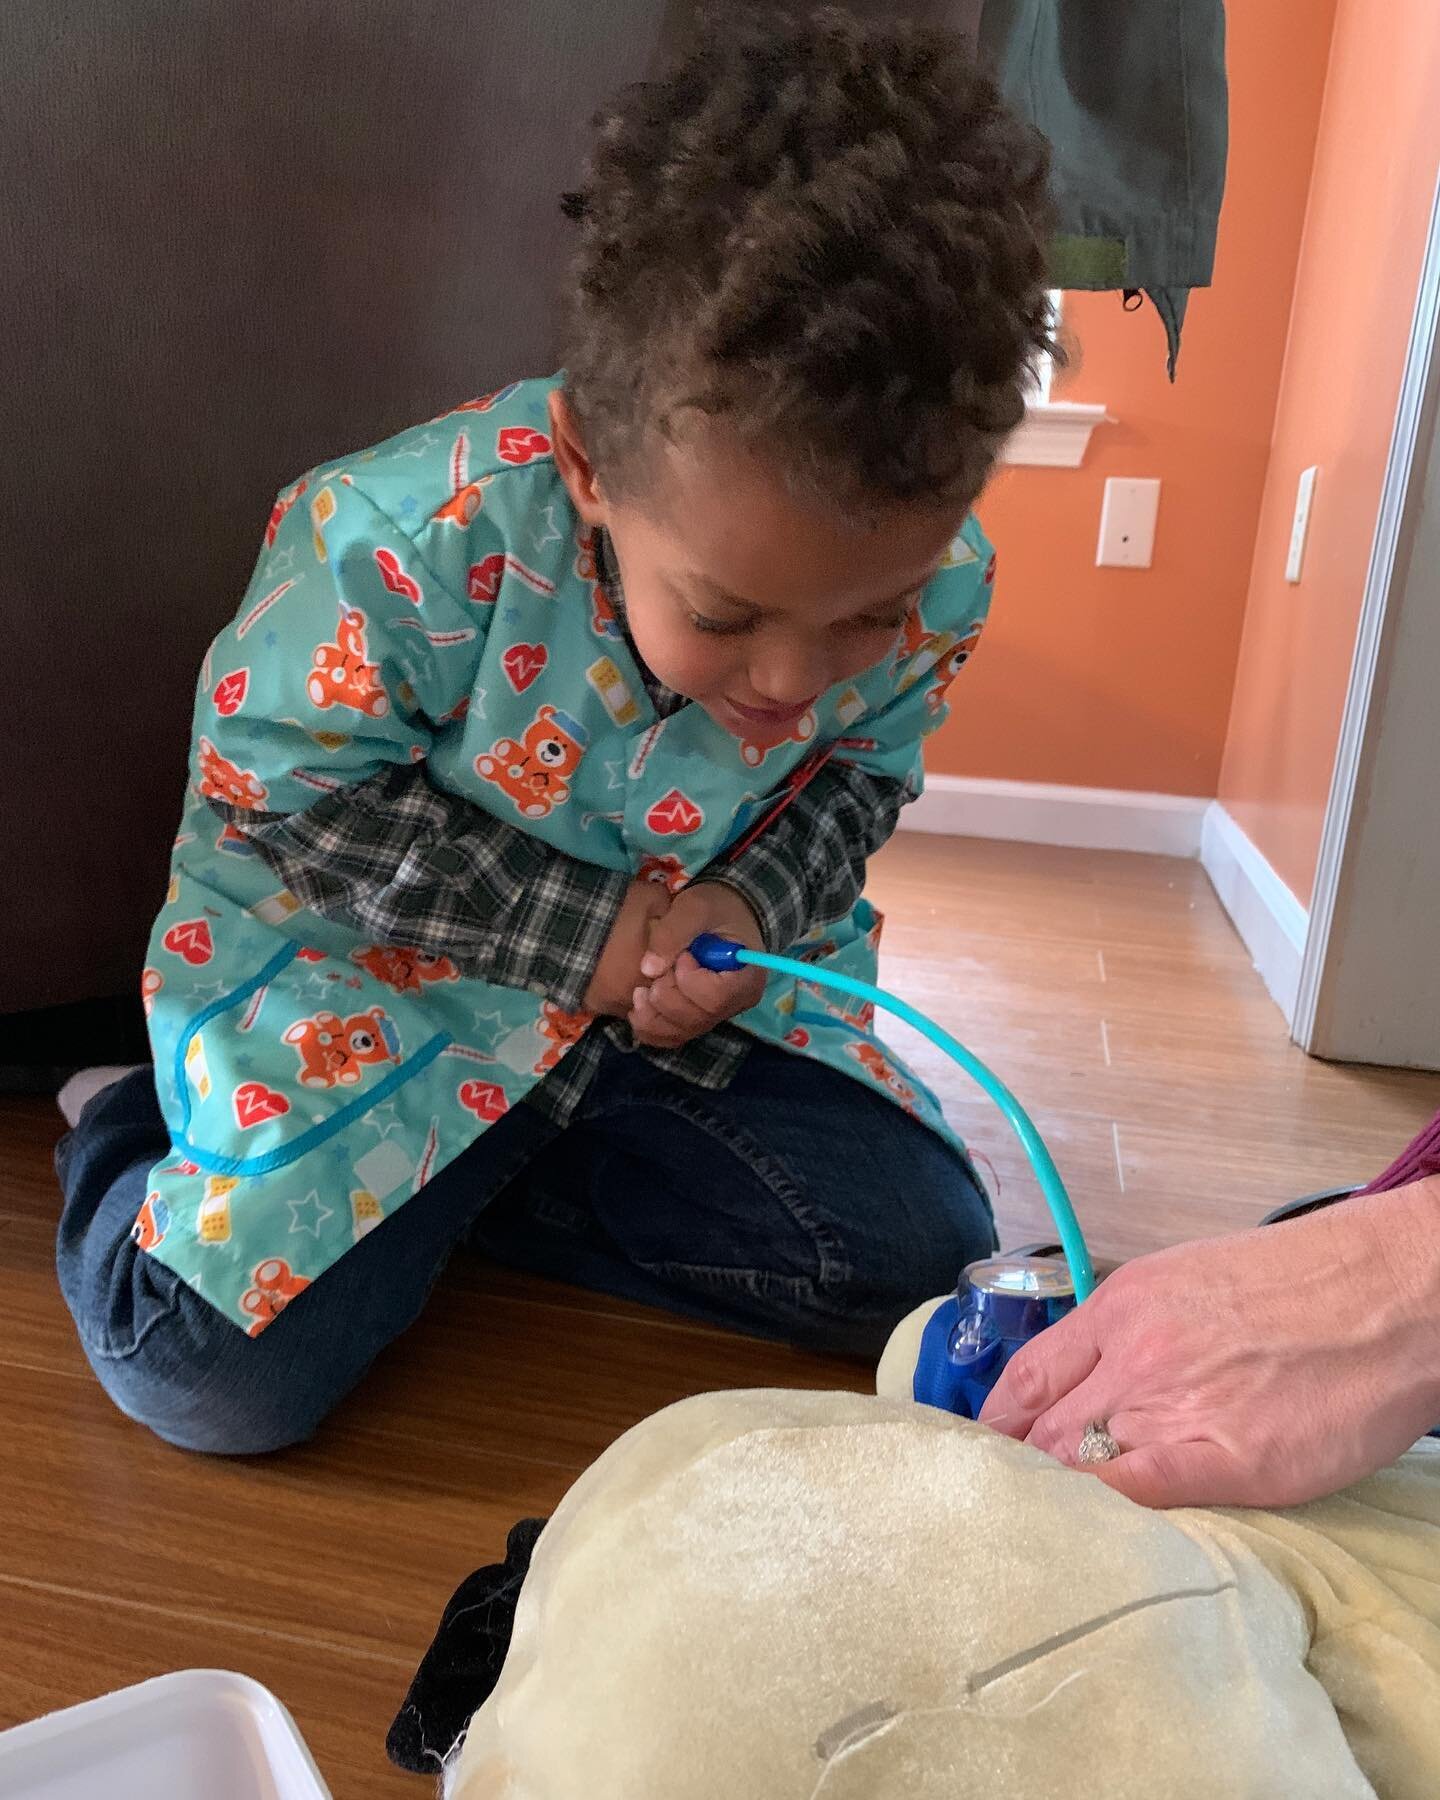 About 6 months prior to stay-at-home orders, I launched Dose of Play child life private practice. 2020 started off so exciting - I was a guest on @wtocmorningbreak and saw two clients in their homes to help prepare the children for surgery. Like ever